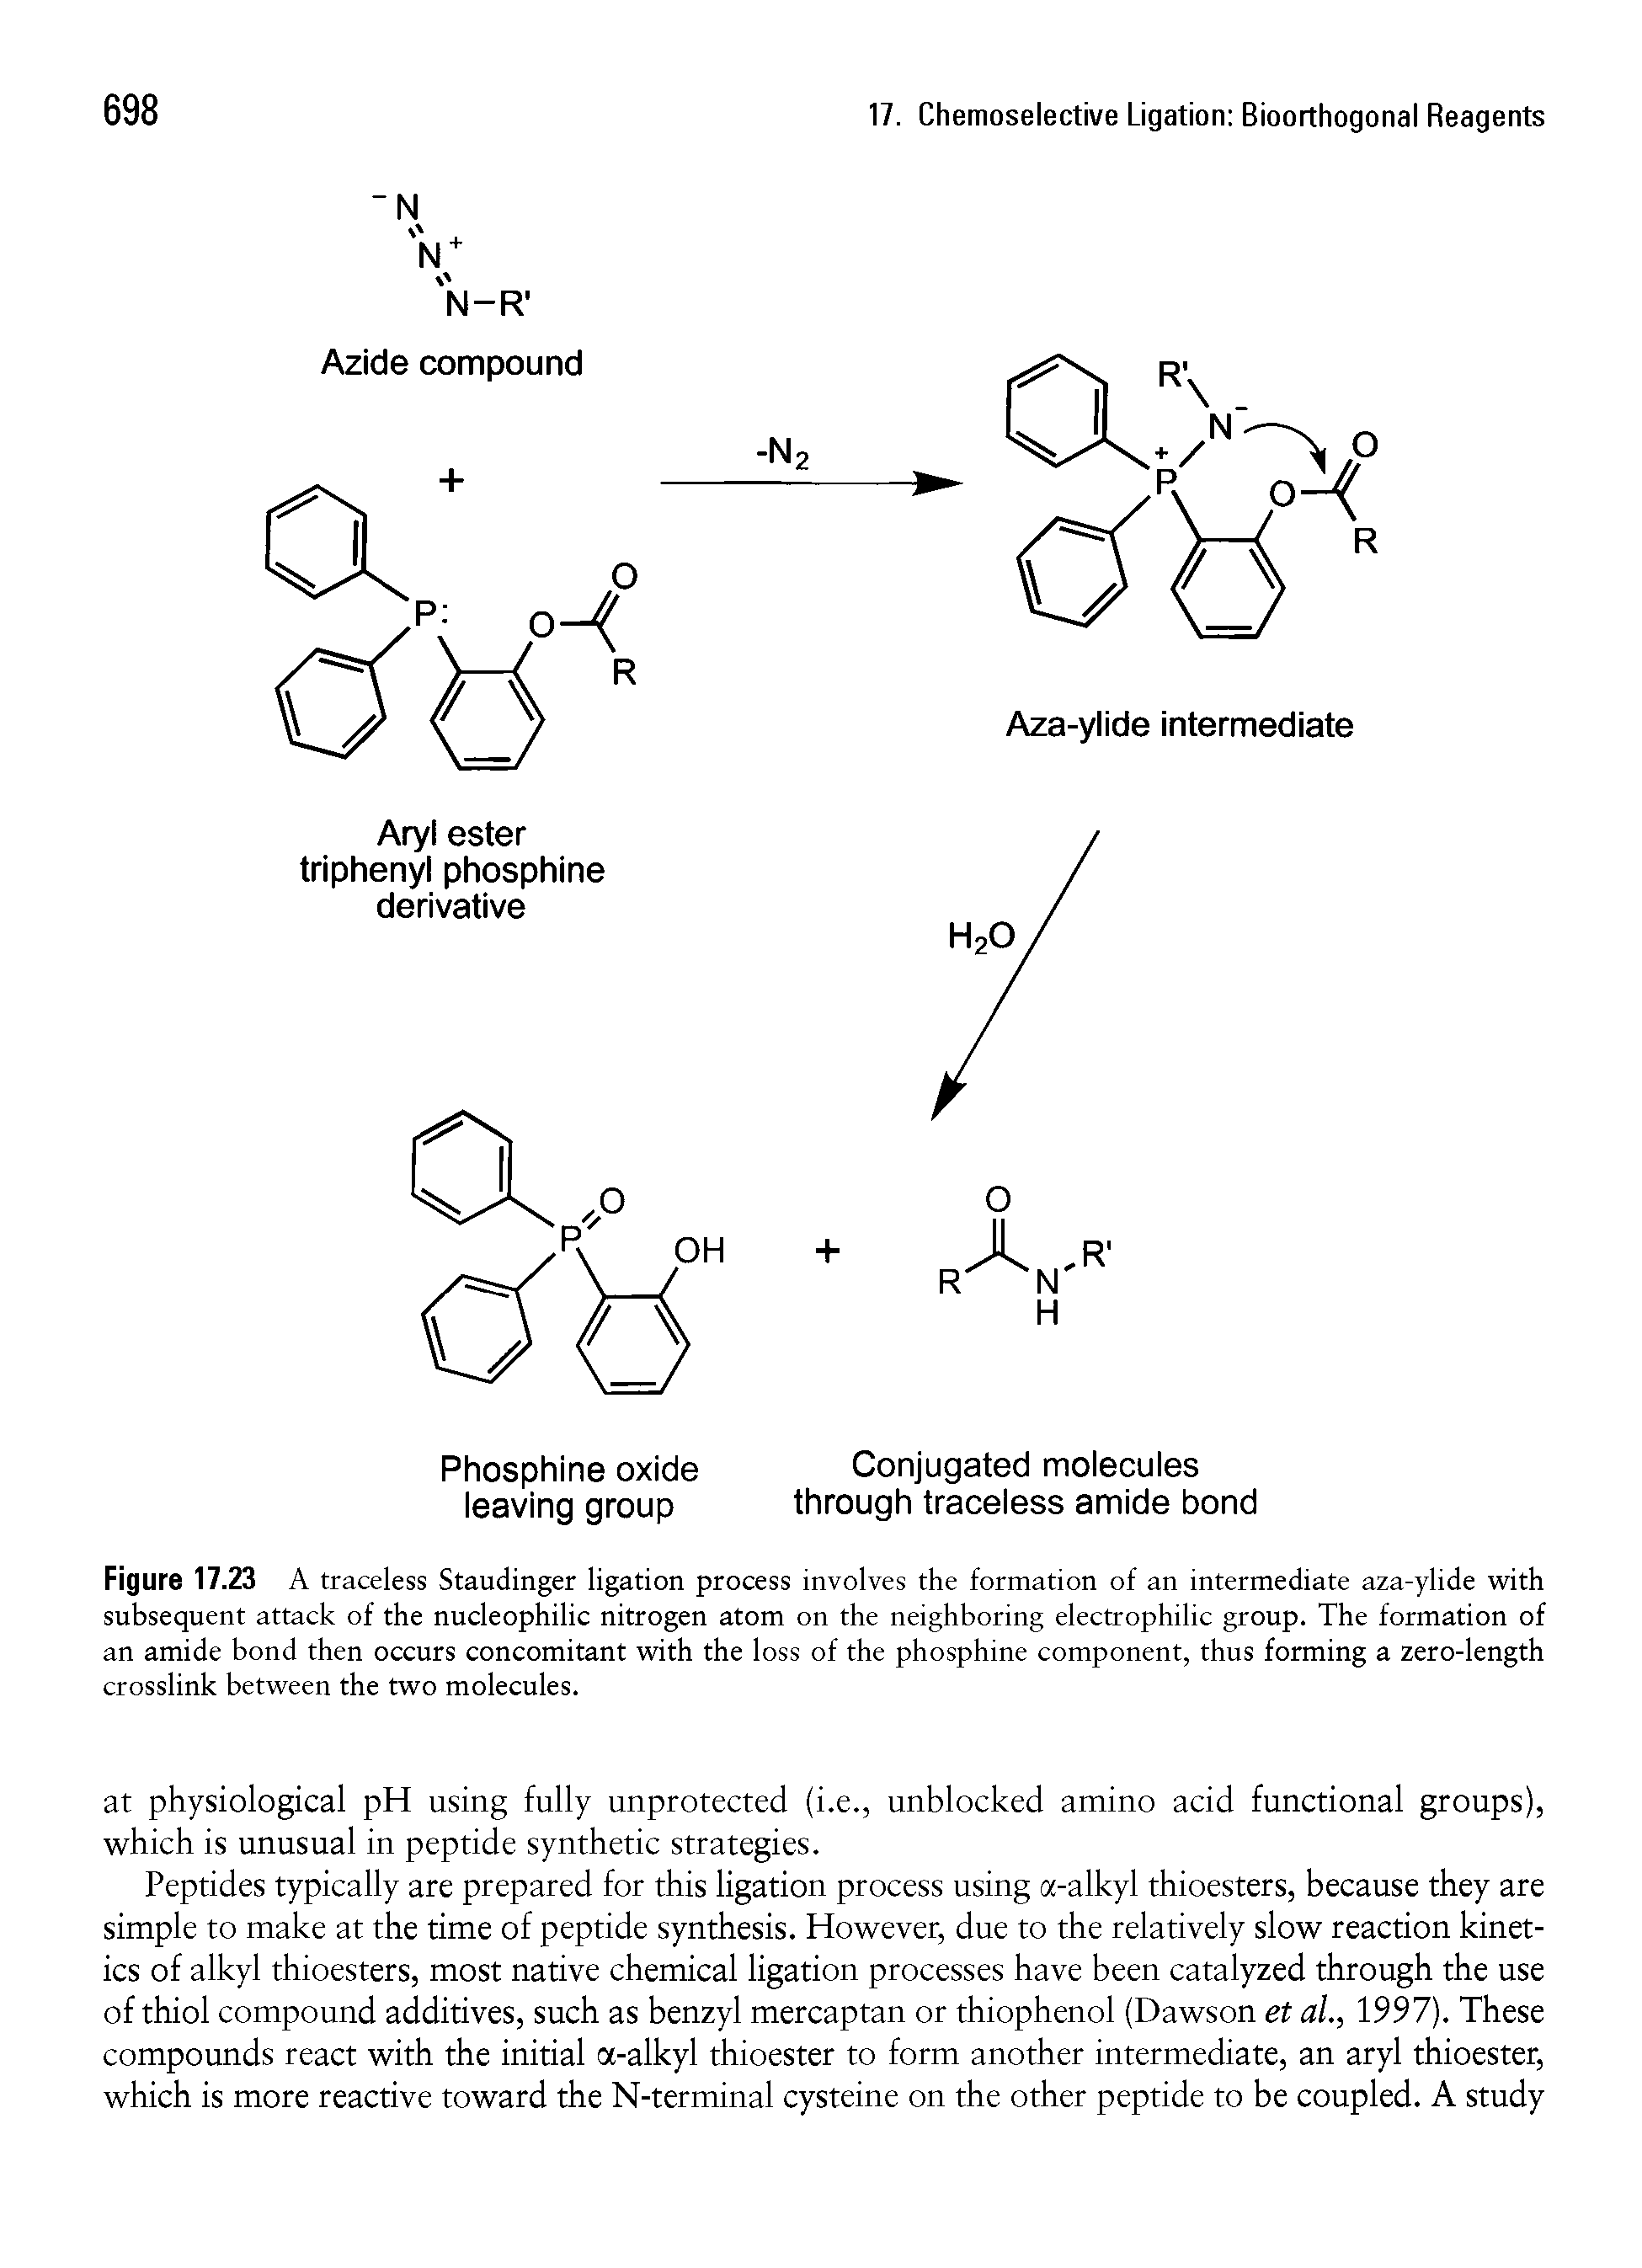 Figure 17.23 A traceless Staudinger ligation process involves the formation of an intermediate aza-ylide with subsequent attack of the nucleophilic nitrogen atom on the neighboring electrophilic group. The formation of an amide bond then occurs concomitant with the loss of the phosphine component, thus forming a zero-length crosslink between the two molecules.